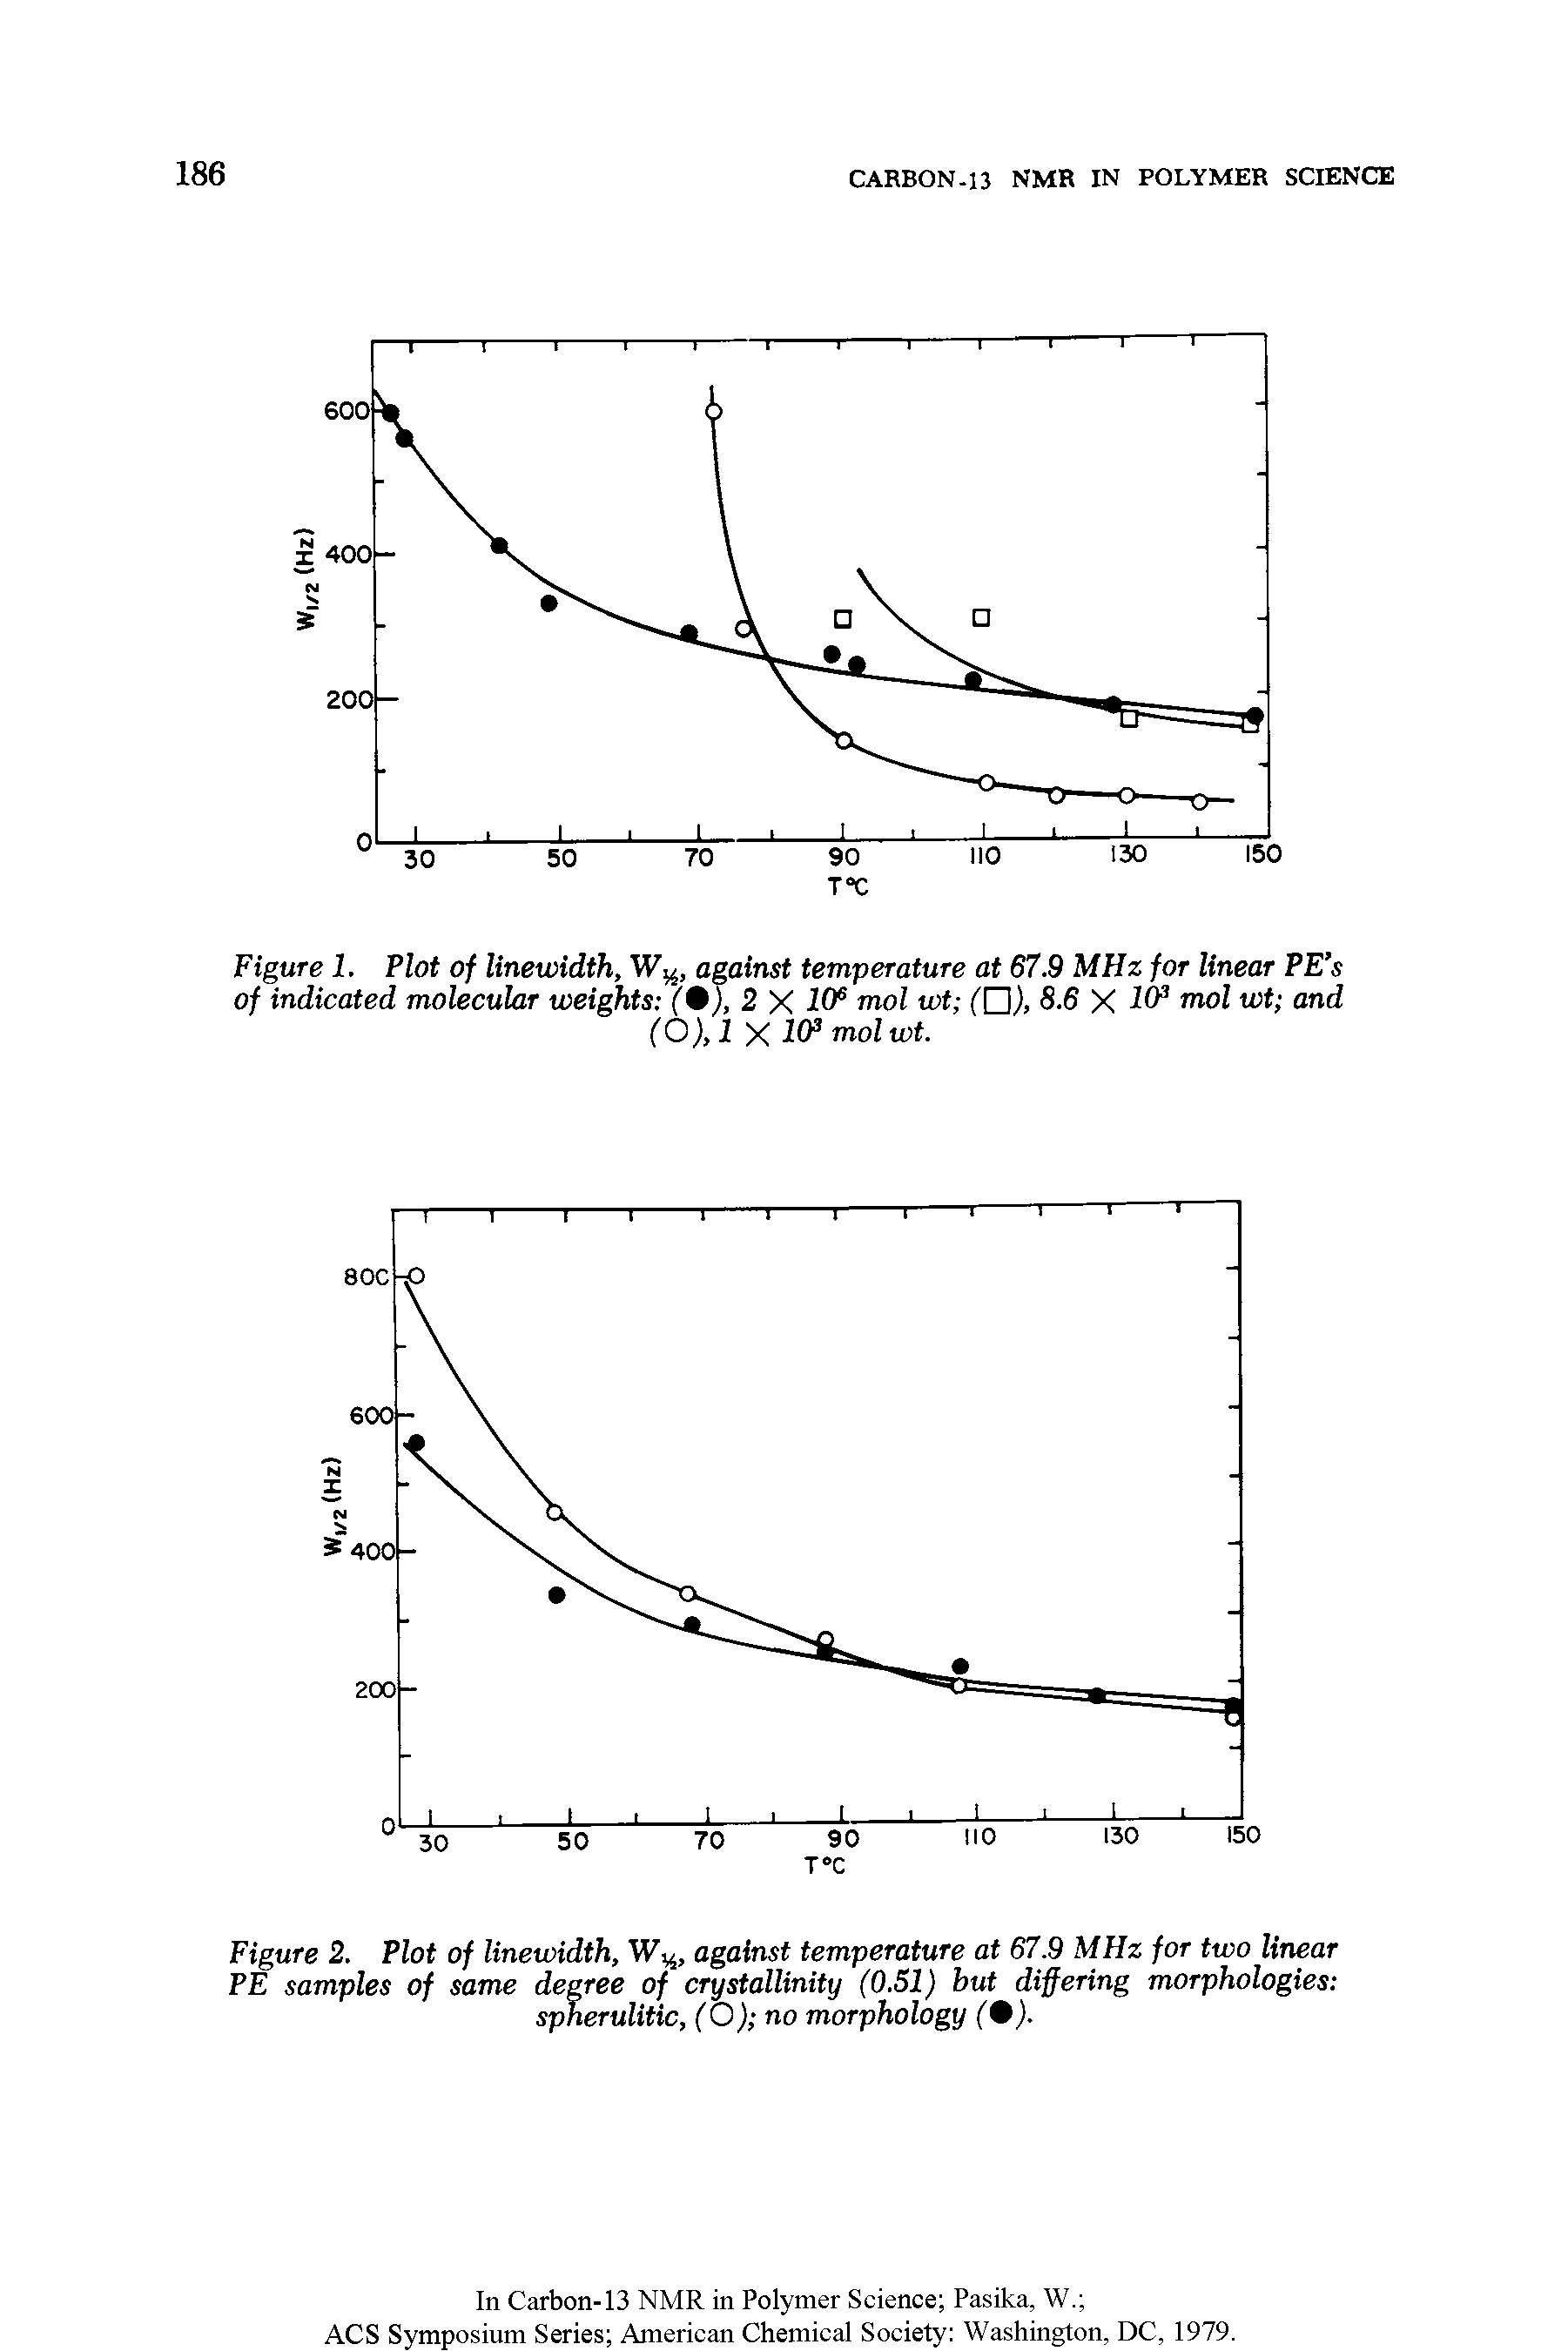 Figure 2. Plot of linewidth, W, against temperature at 67.9 MHz for two linear PE samples of same degree of crystallinity (0.51) but differing morphologies spherulitic, (Ono morphology ( ).